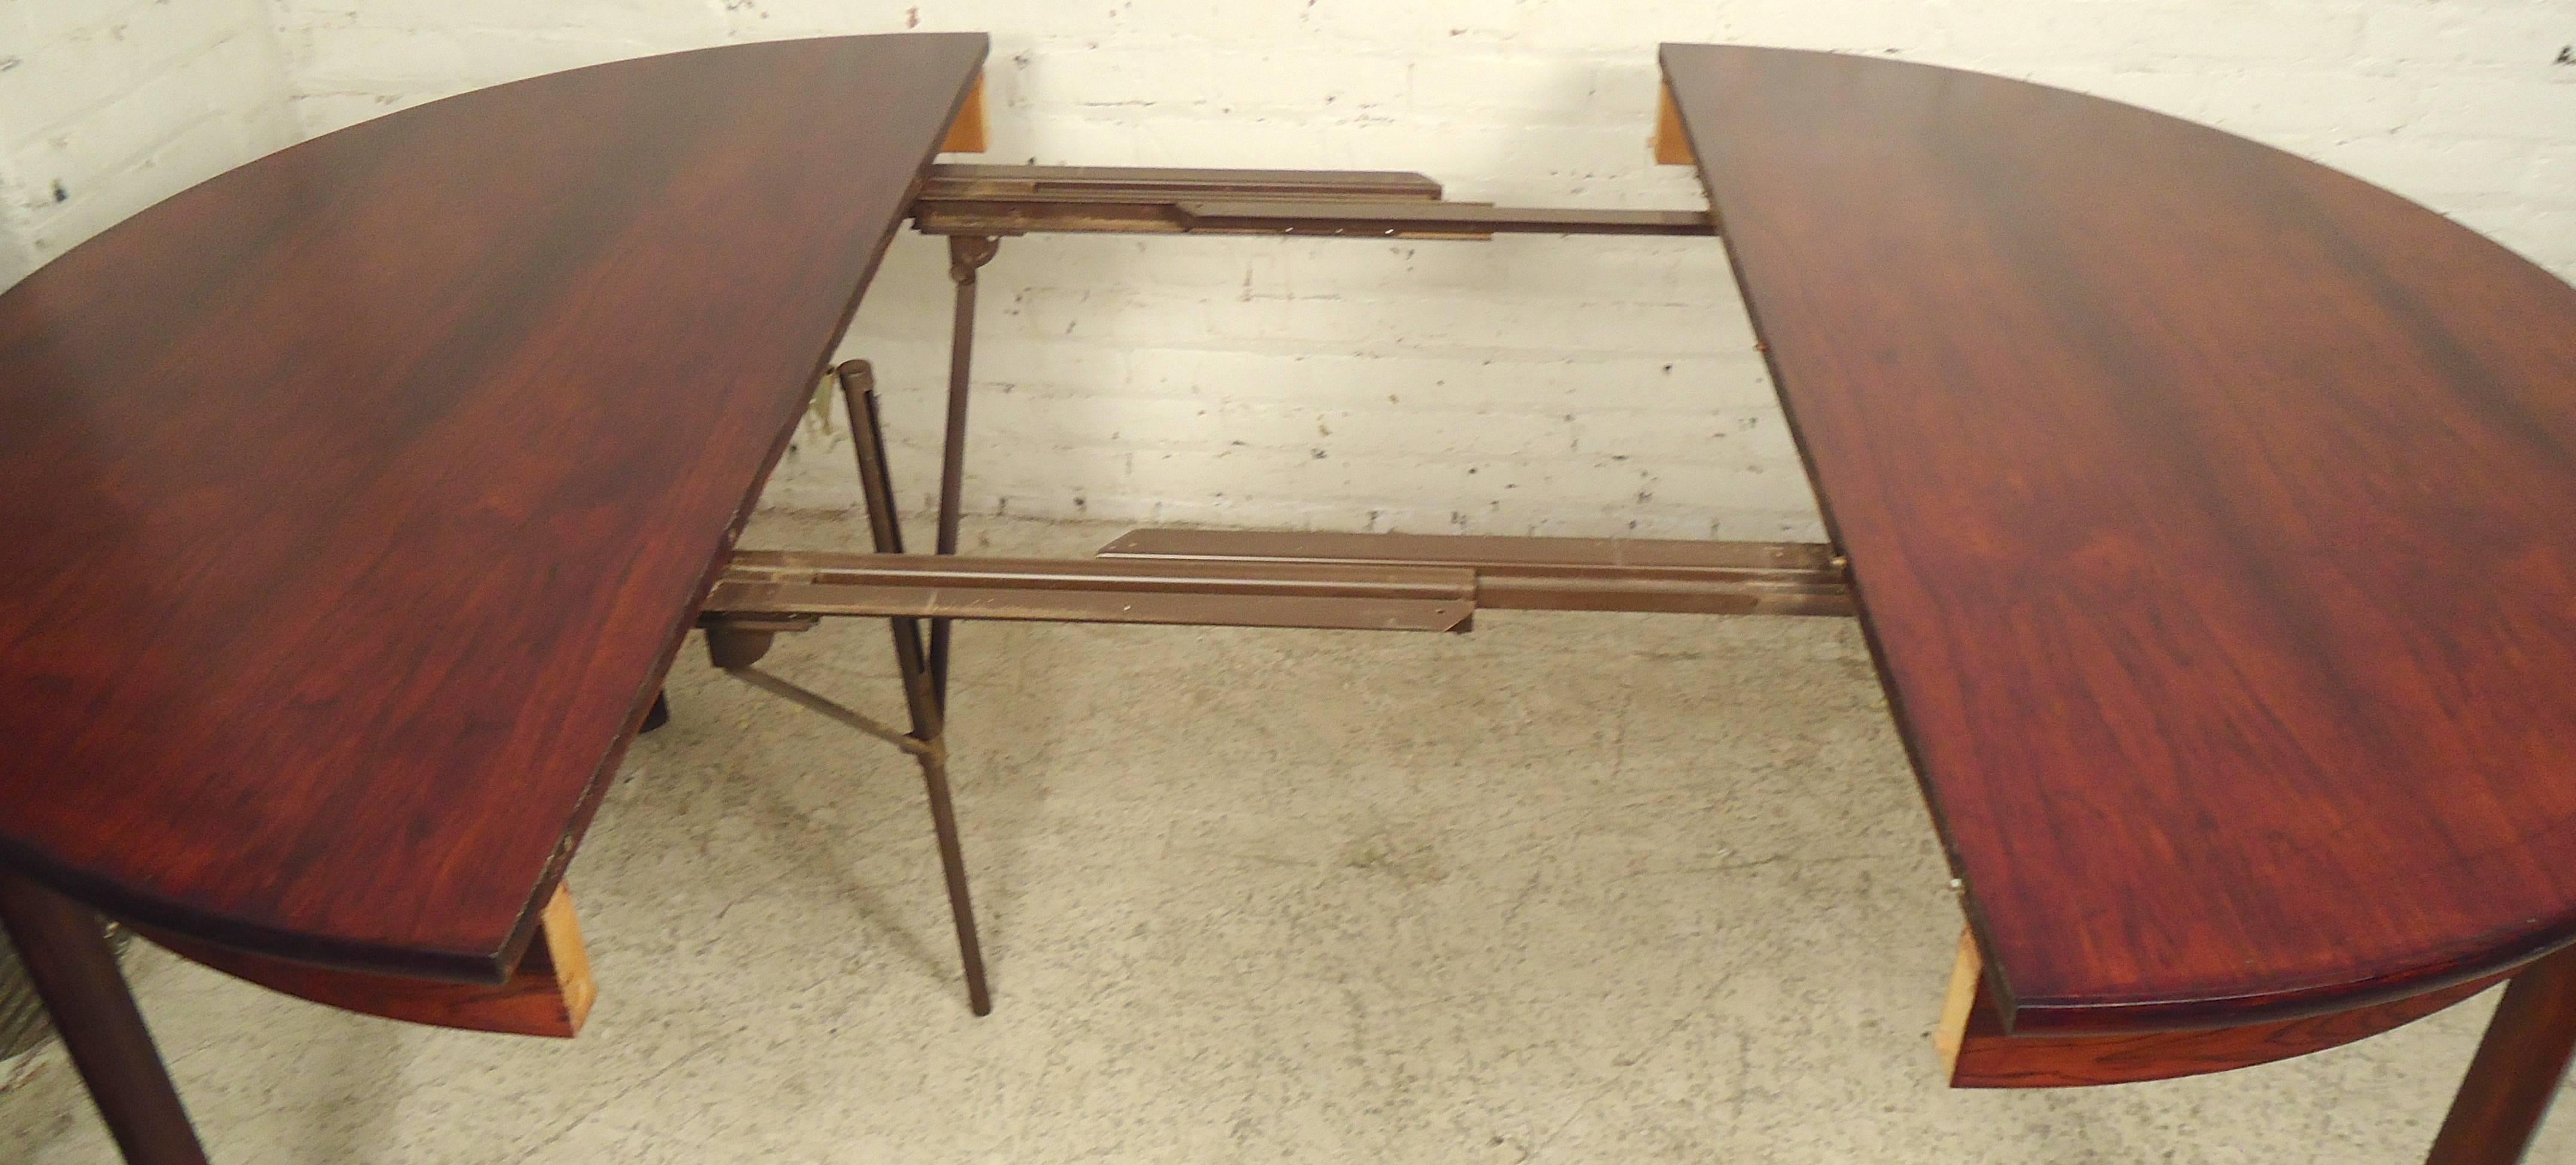 CJ Rosengaarden Designed Dining Table in Rich Rosewood In Good Condition For Sale In Brooklyn, NY